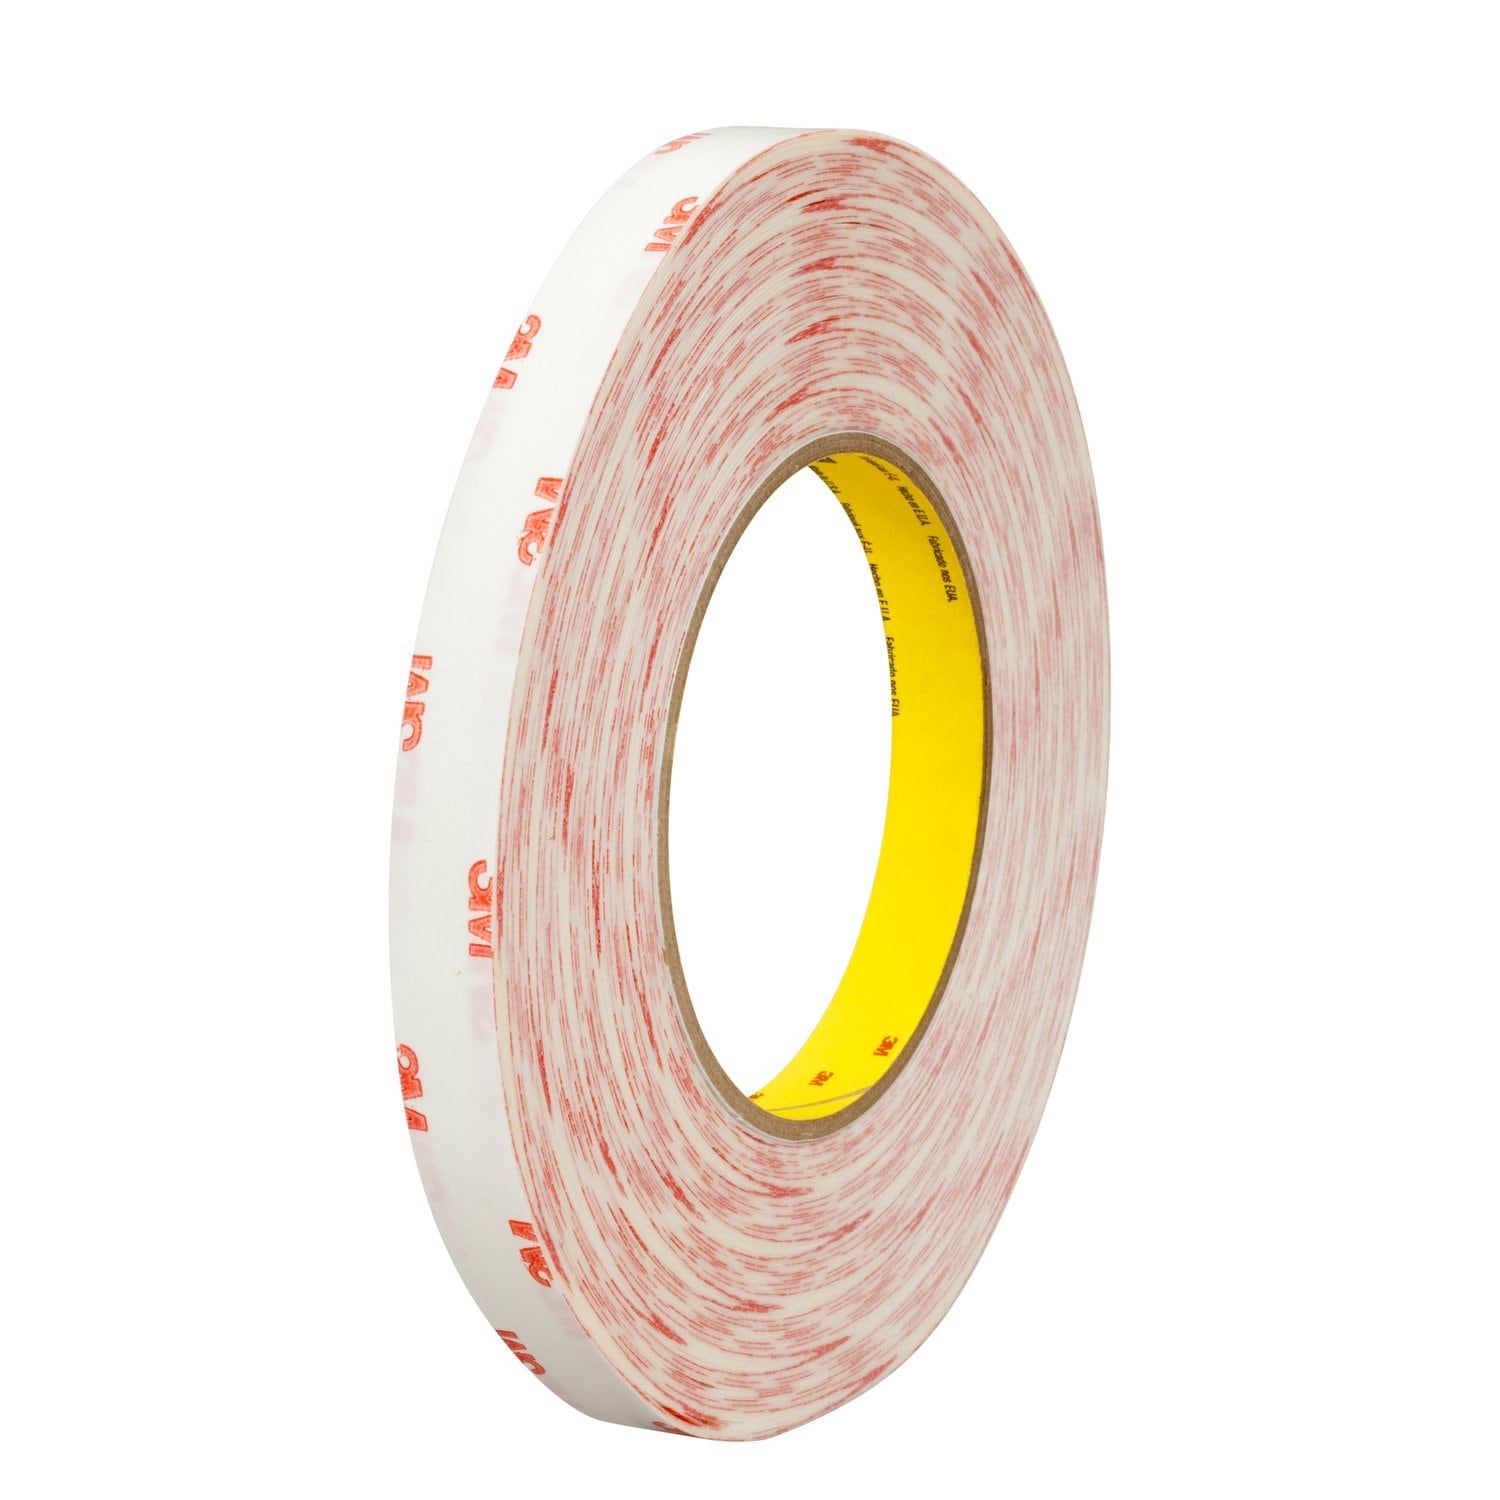 7010336281 - 3M Double Coated Tissue Tape 9456, Clear, 54 in x 180 yd, 4 mil, 1 roll
per case